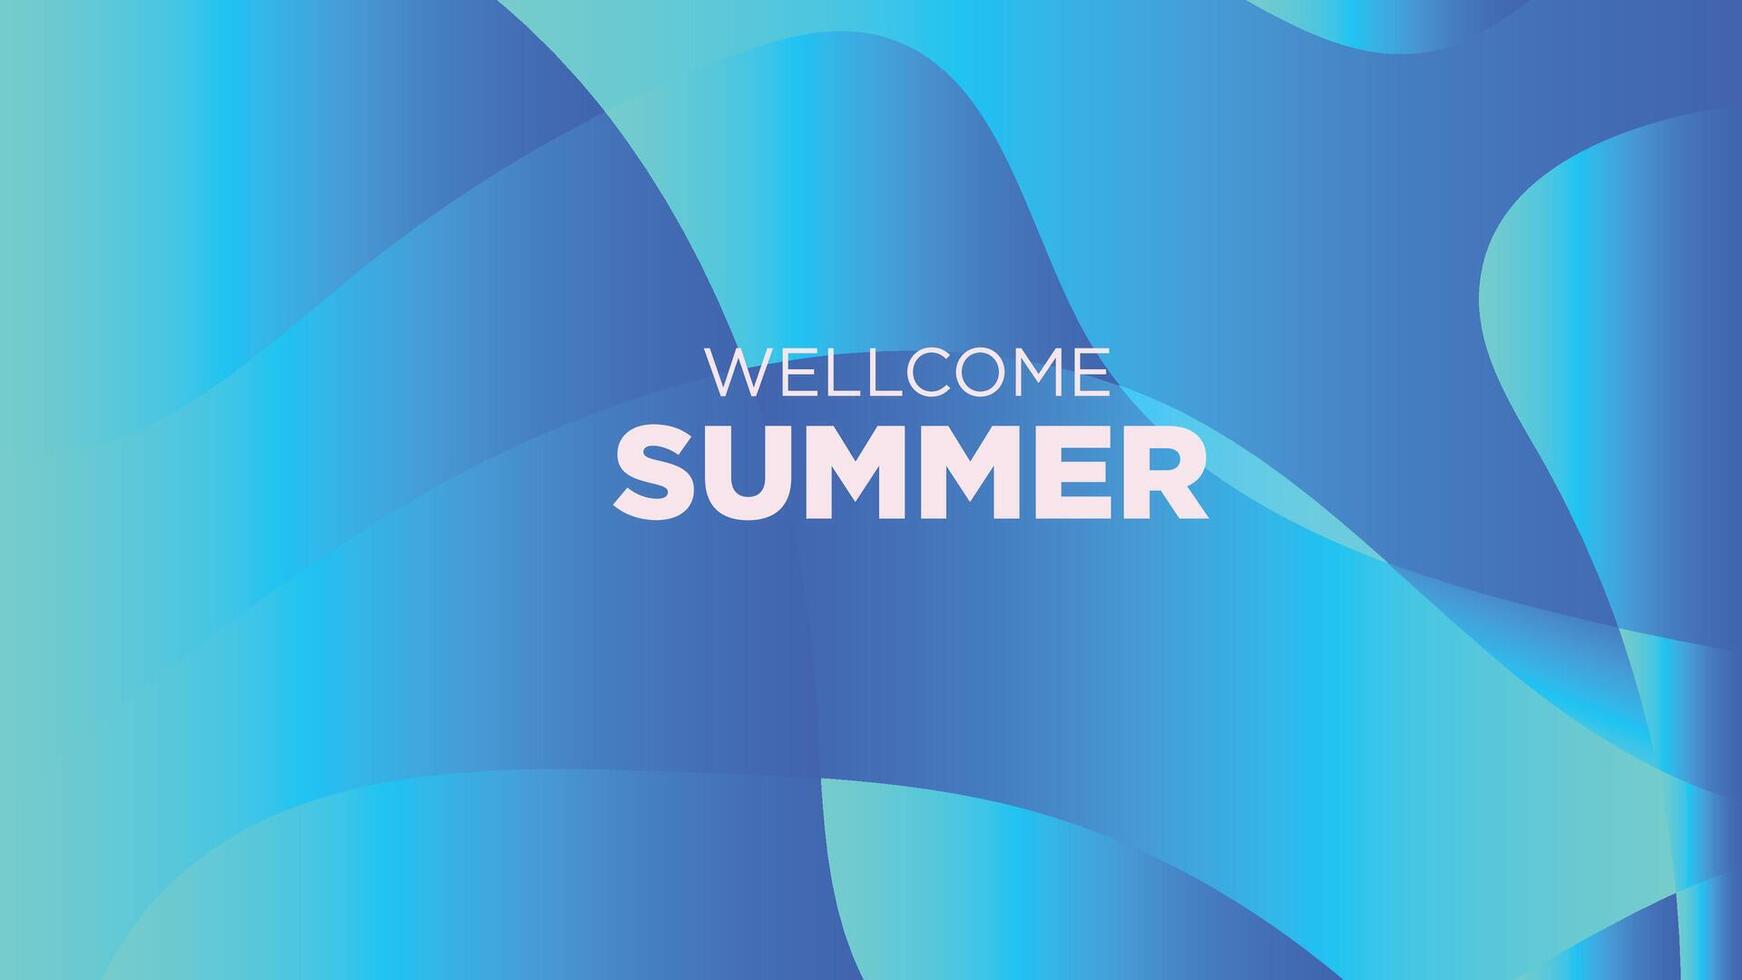 wellcome summer in abstract cold blue background vector